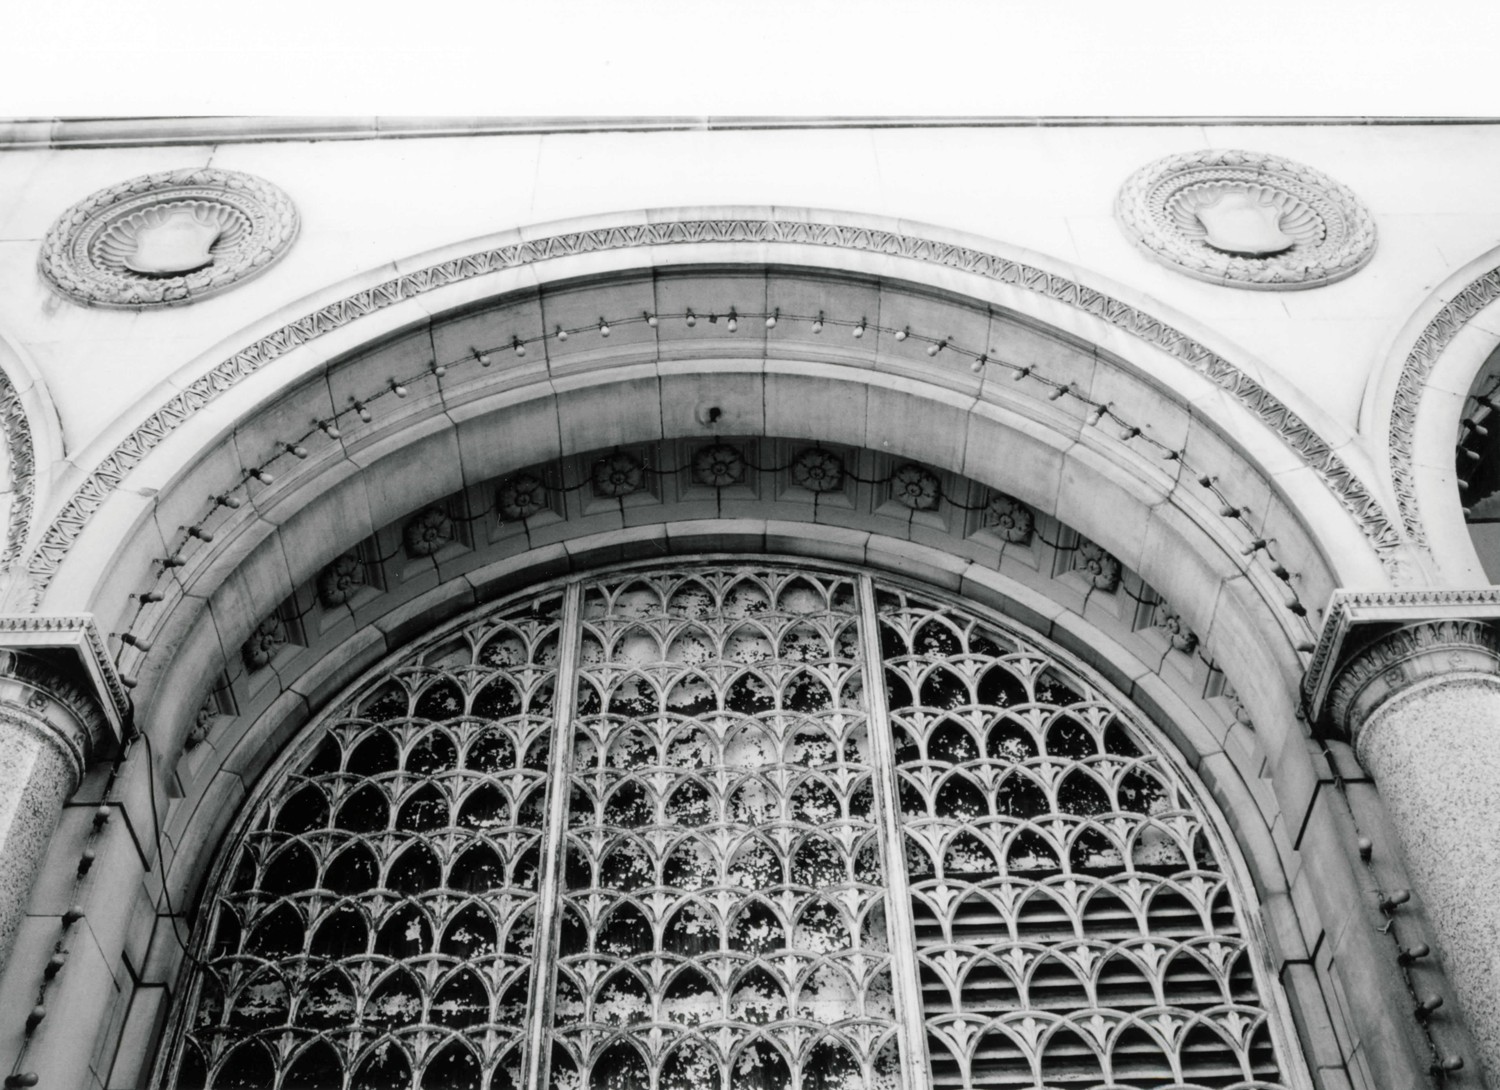 Lasalle, Koch and Company Department Store - Macys, Toledo Ohio VIEW EAST, THE METAL GRILL TYMPANUM AND TERRA COTTA BRICK-WORK INTRADOS ABOVE THE HURON STREET FACADE REVOLVING DOOR ENTRANCE (1995)